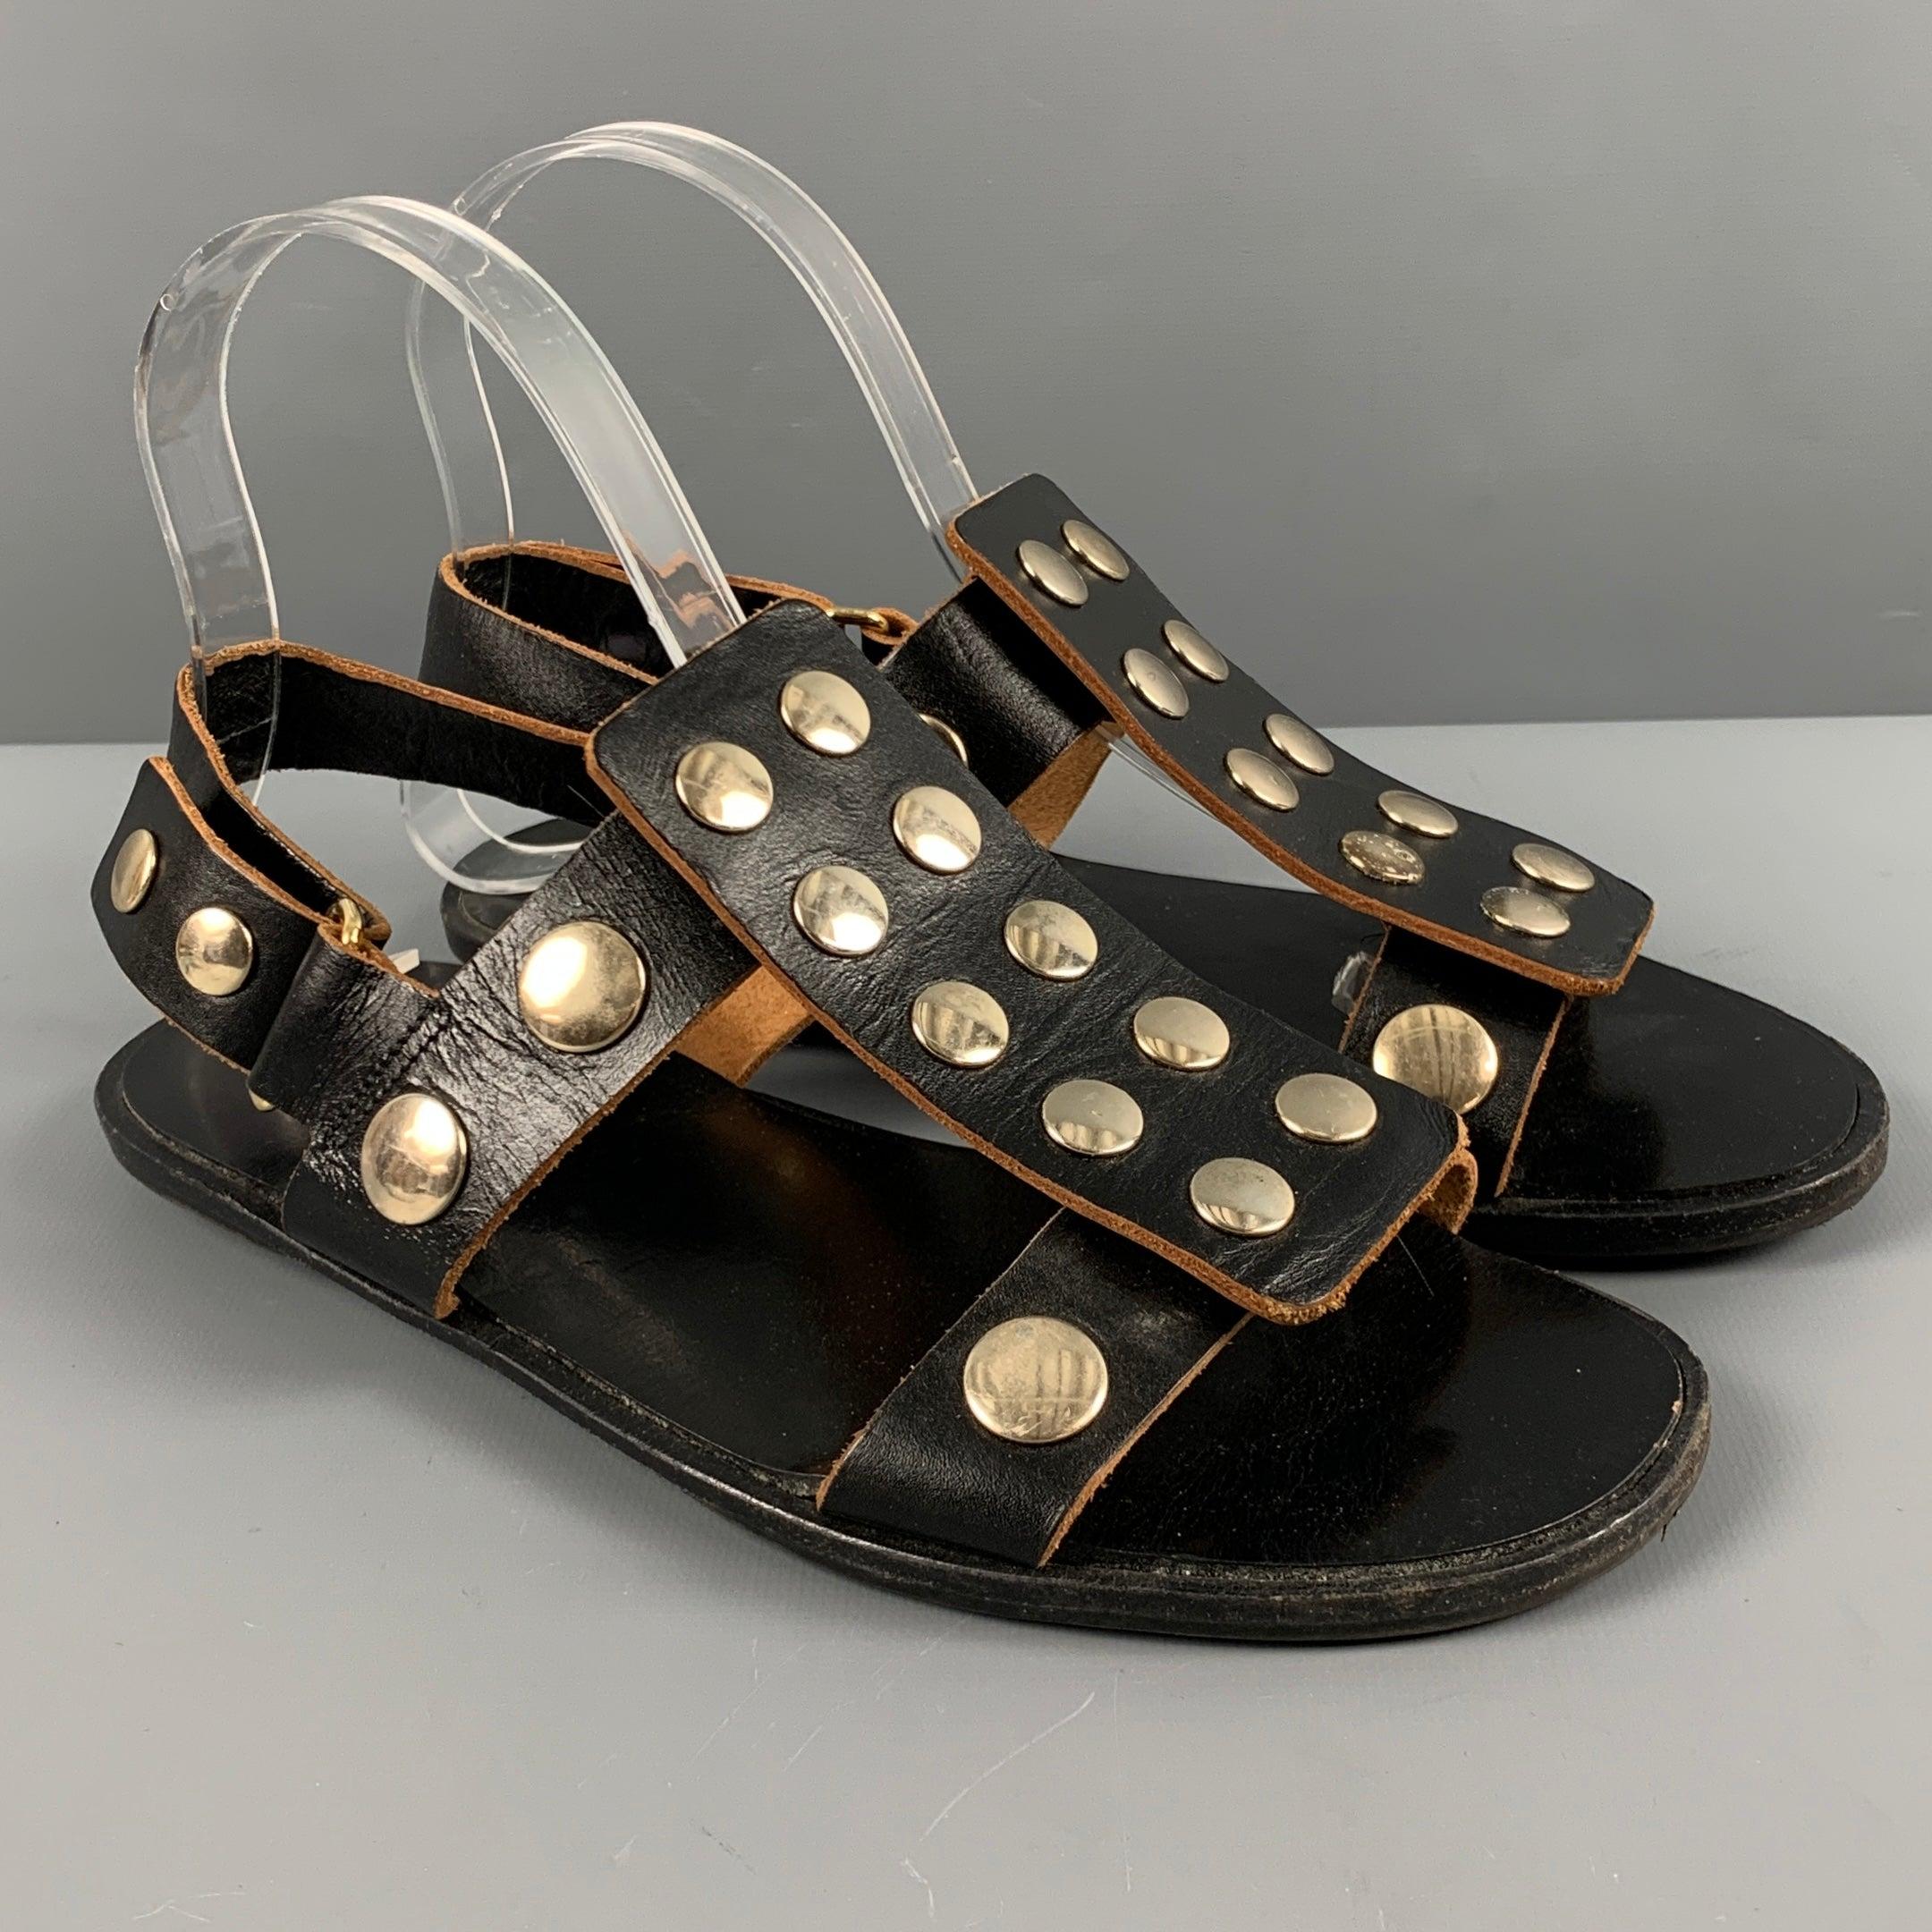 MARNI sandals
in a black and tan leather featuring an ankle strap style, and studded look. Made in Italy.Very Good Pre-Owned Condition. Moderate signs of wear on studs. 

Marked:   size not marked.Outsole: 9.5 inches  x 3.75 inches 
  
  
